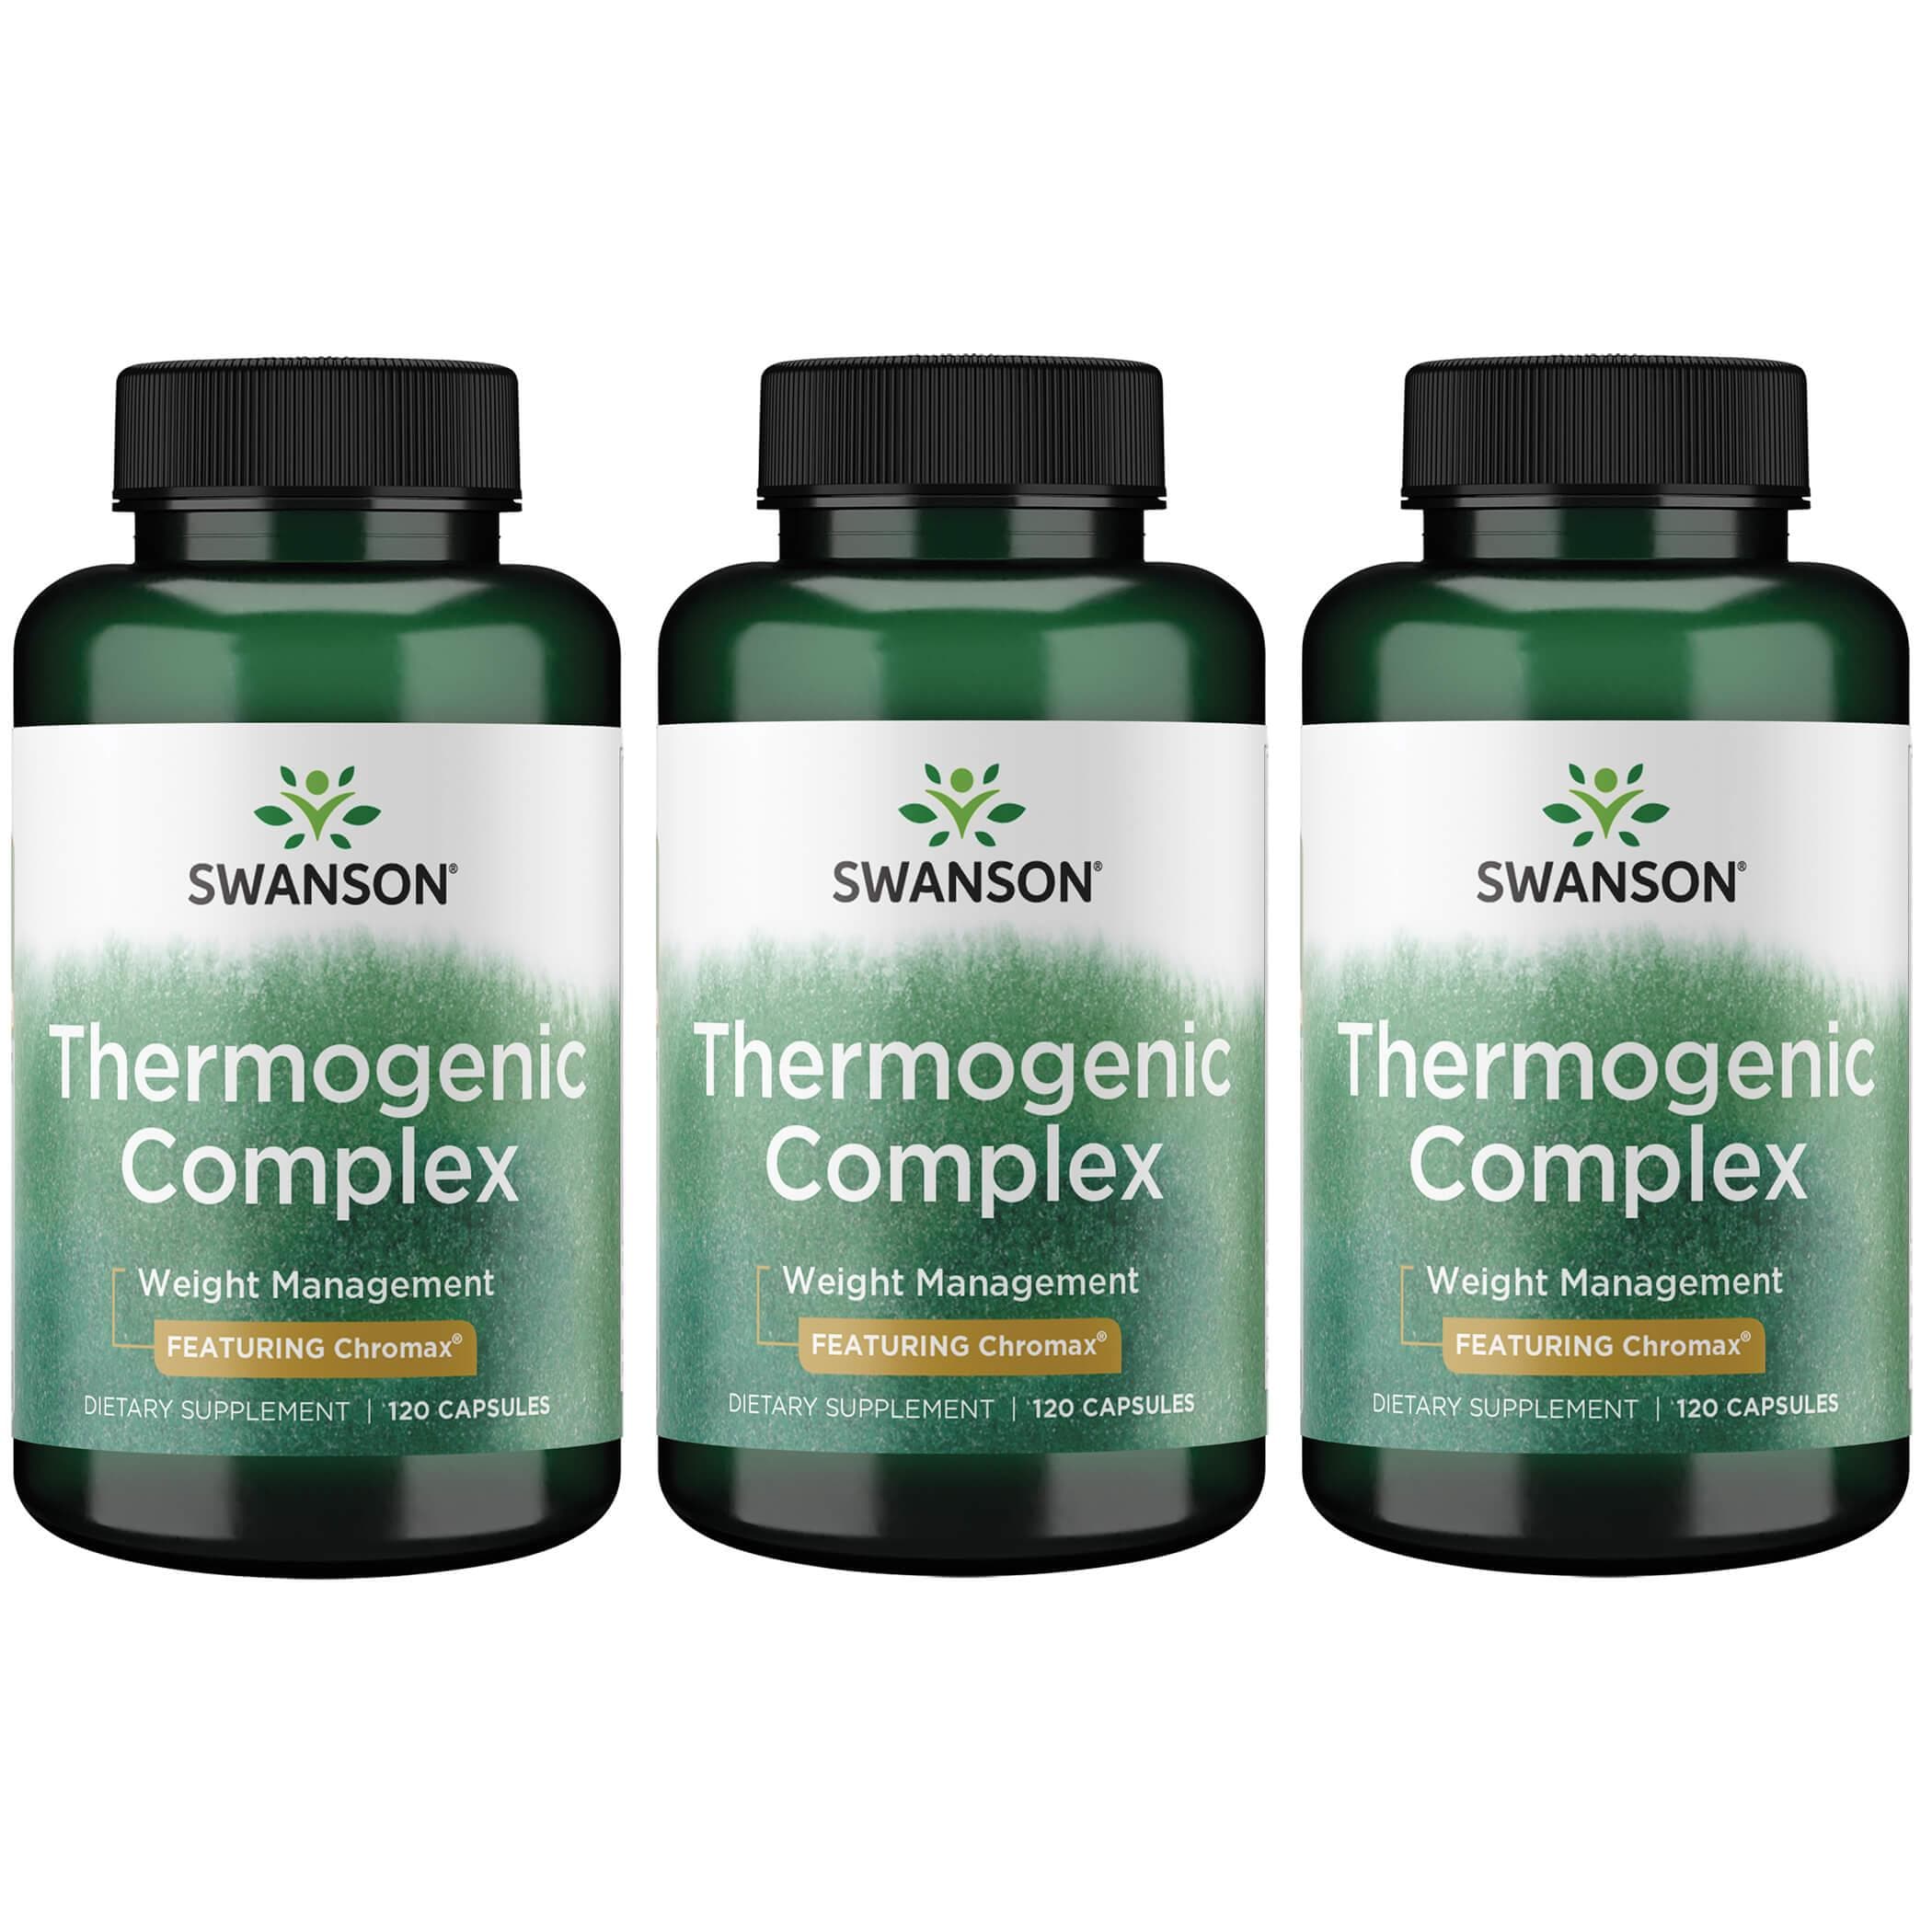 Swanson Best Weight-Control Formulas Thermogenic Complex 3 Pack Vitamin 120 Caps